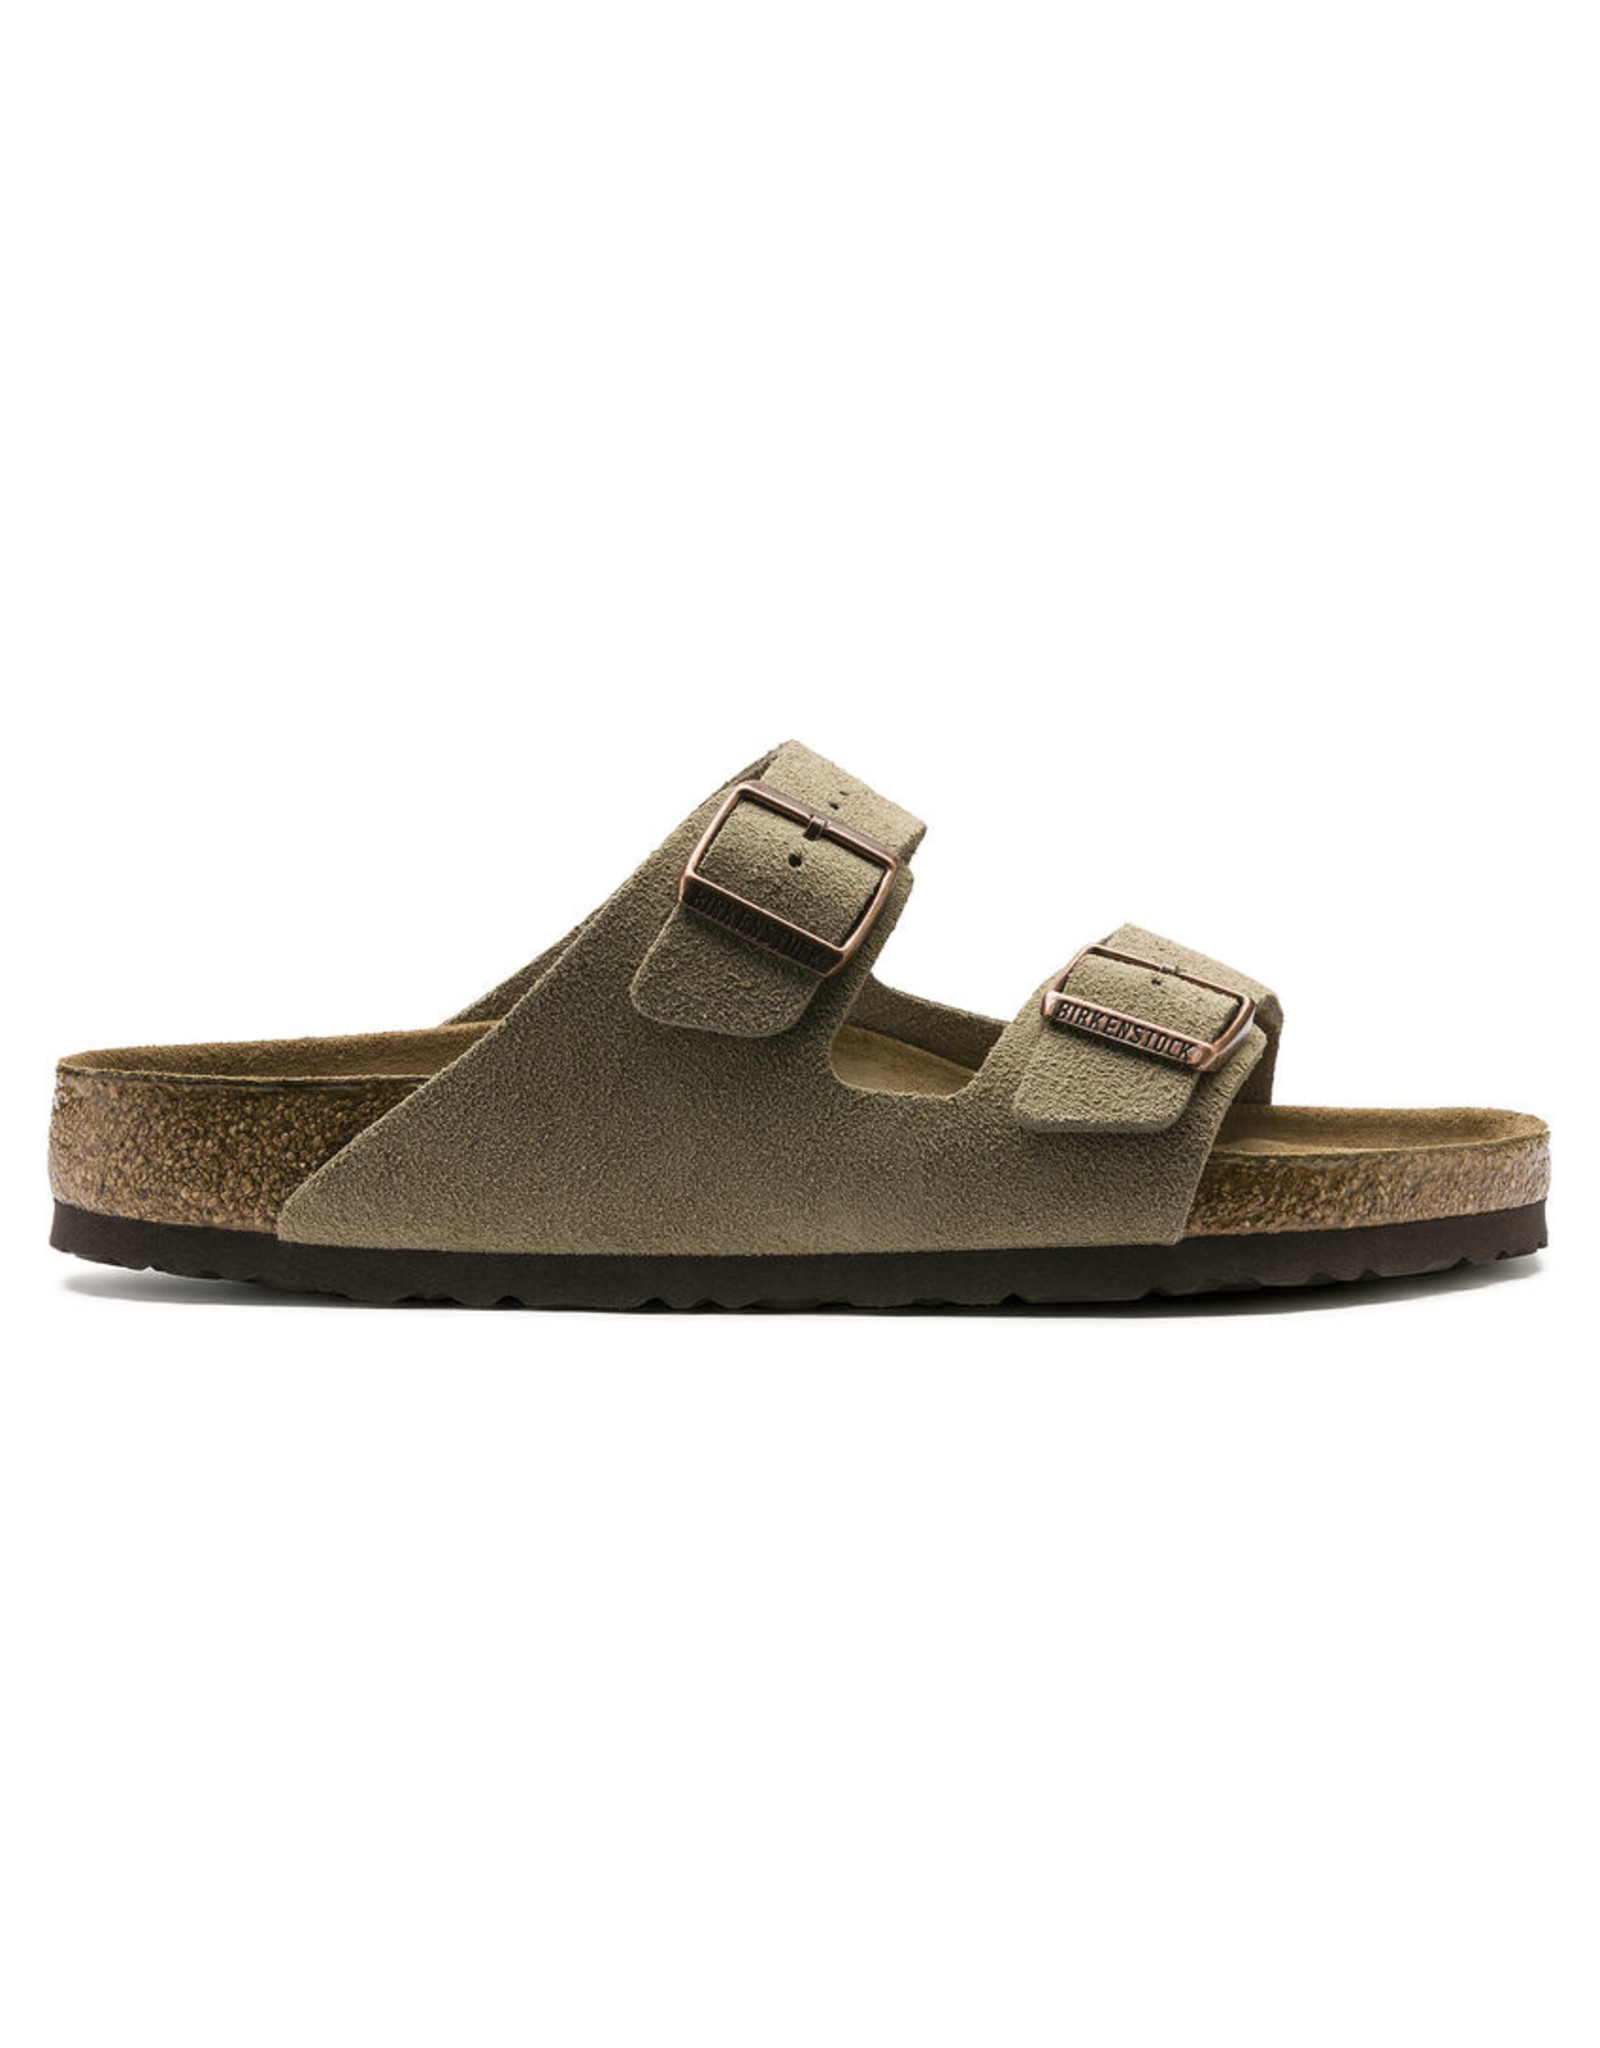 BIRKENSTOCK ARIZONA SOFT FOOTBED SUEDE LEATHER-TAUPE